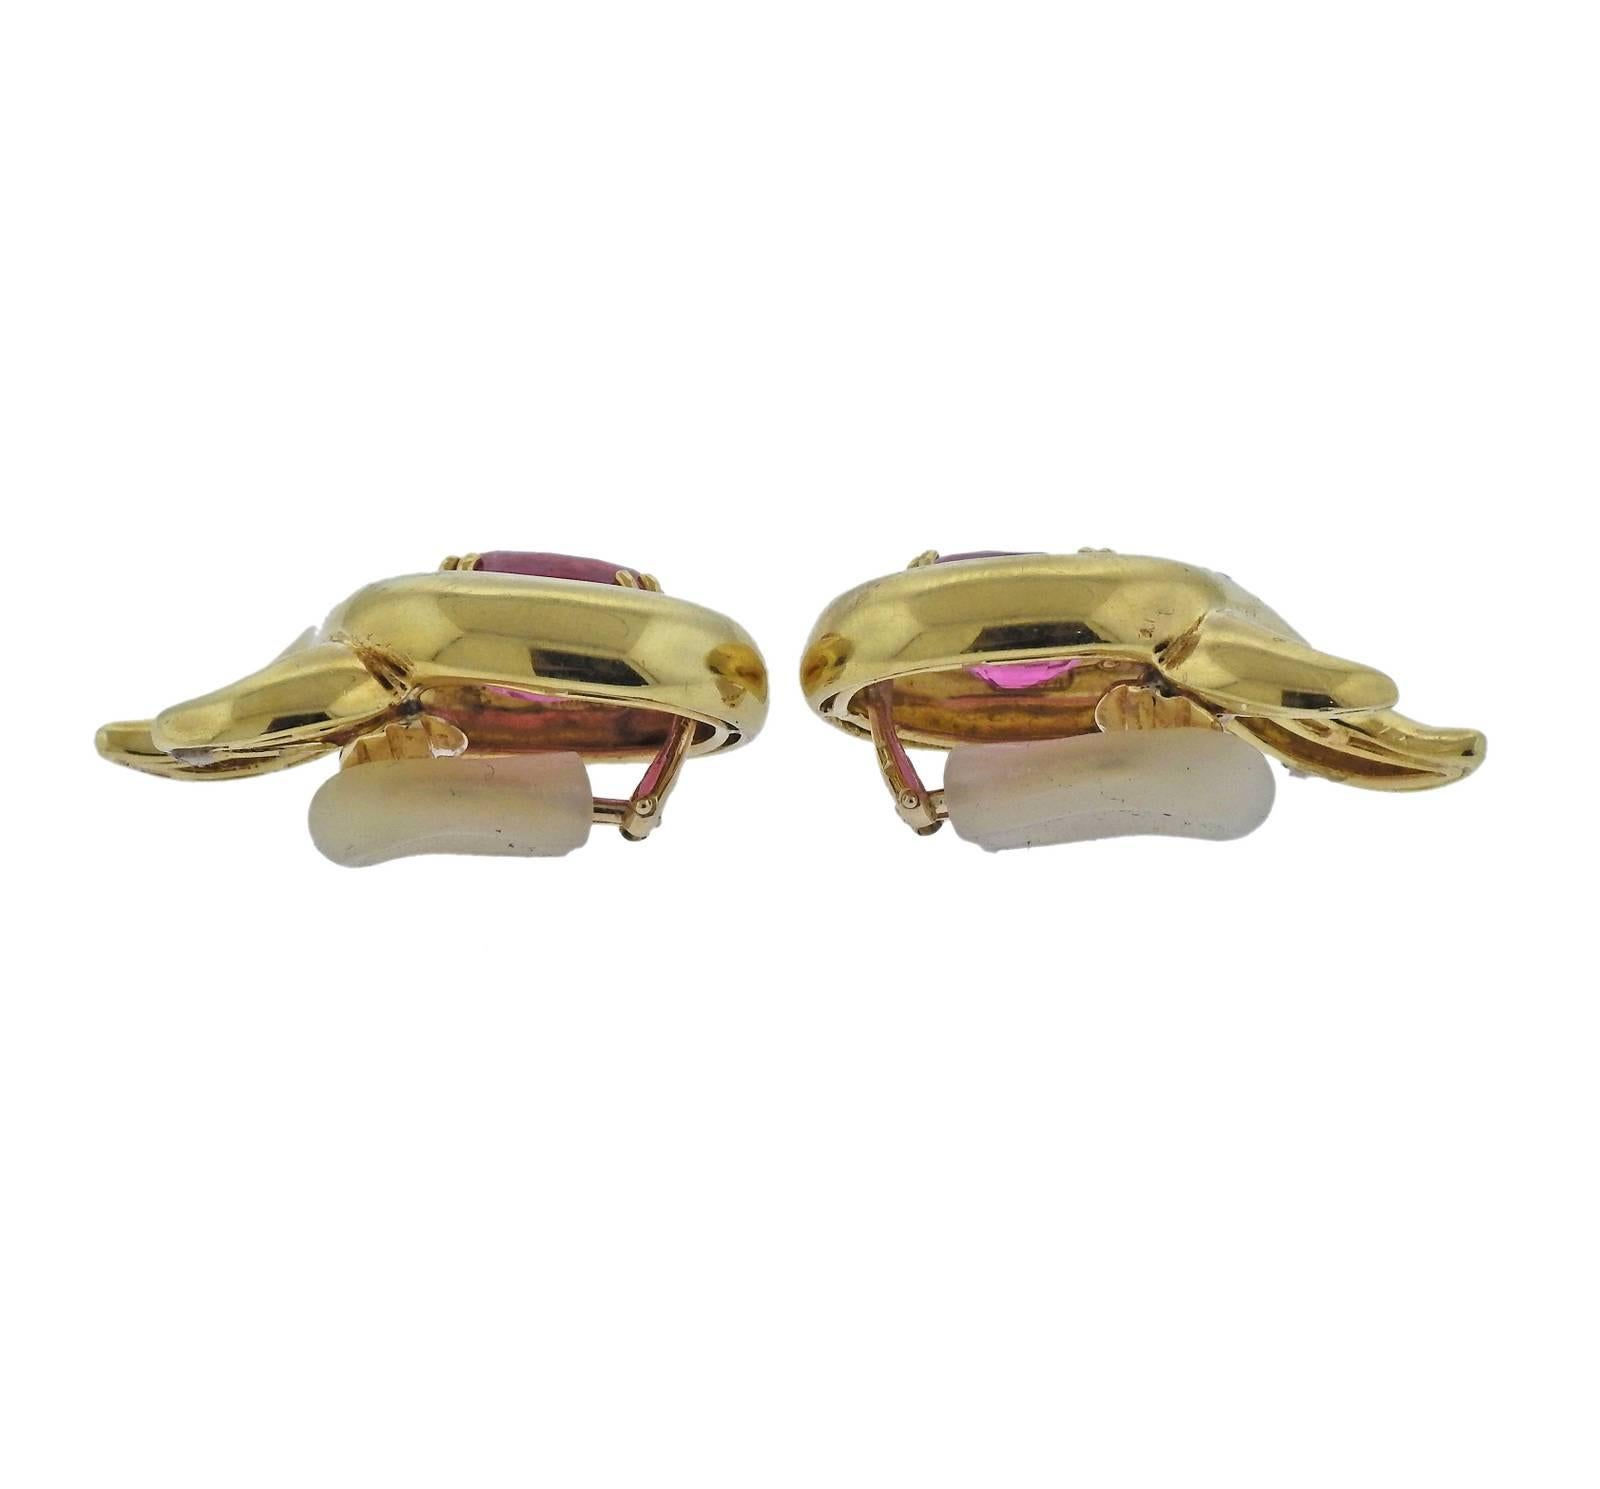 A pair of 18k gold earrings crafted by Verdura. Earrings feature pink tourmalines measuring 14.5mm x 11.2mm. Earrings measure Earrings are 36mm x 21mm and weigh 29.3 grams. 